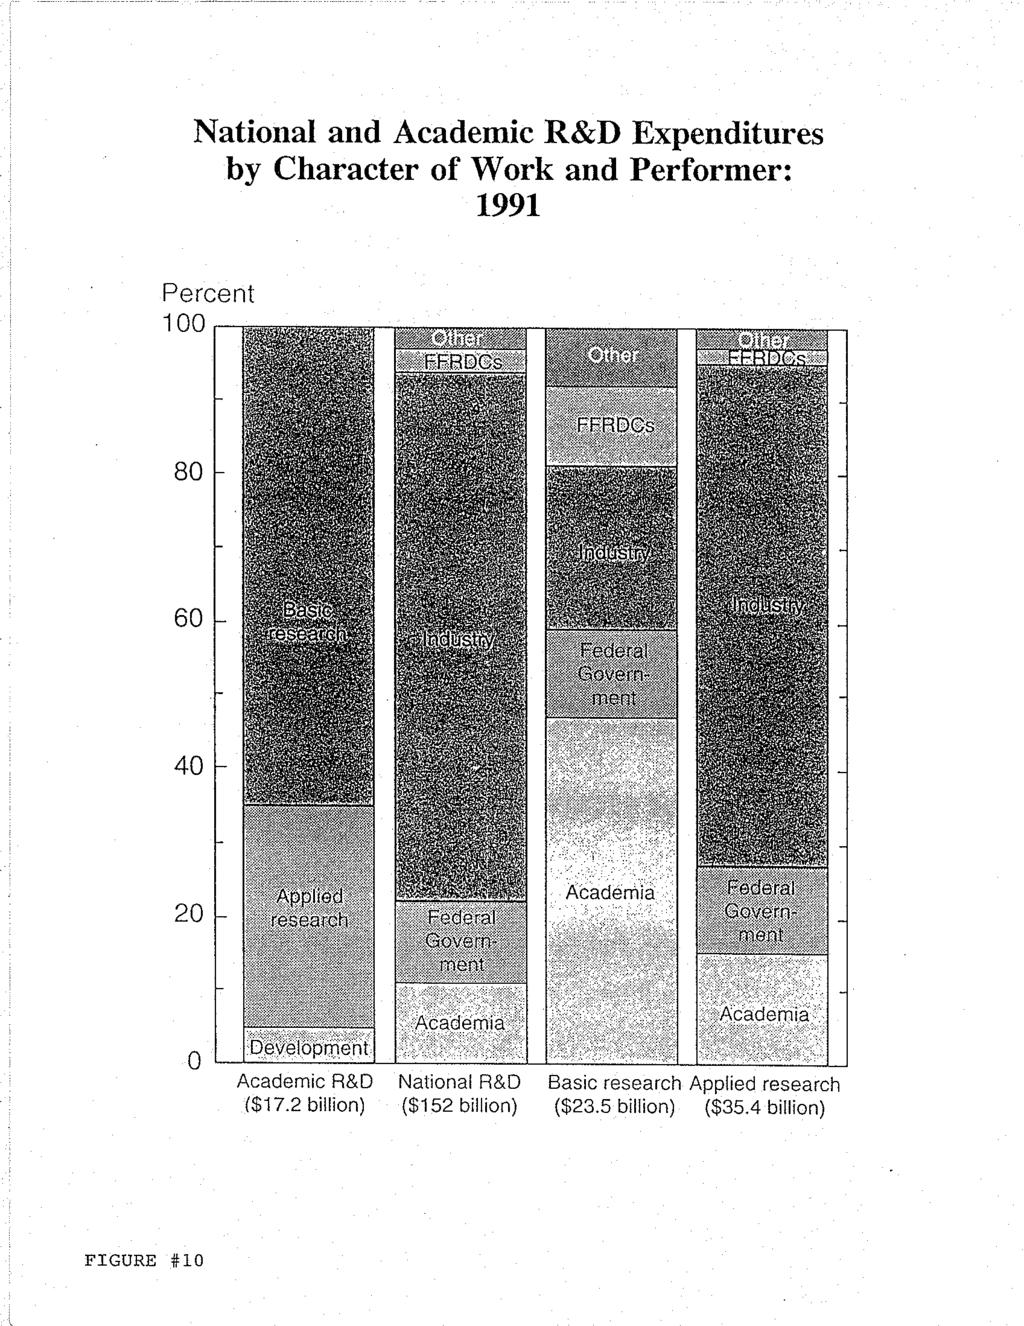 National and Academic R&D Expenditures by Character of Work and Performer: 1991 Percent 100 80 60 40 20 o Academic R&D